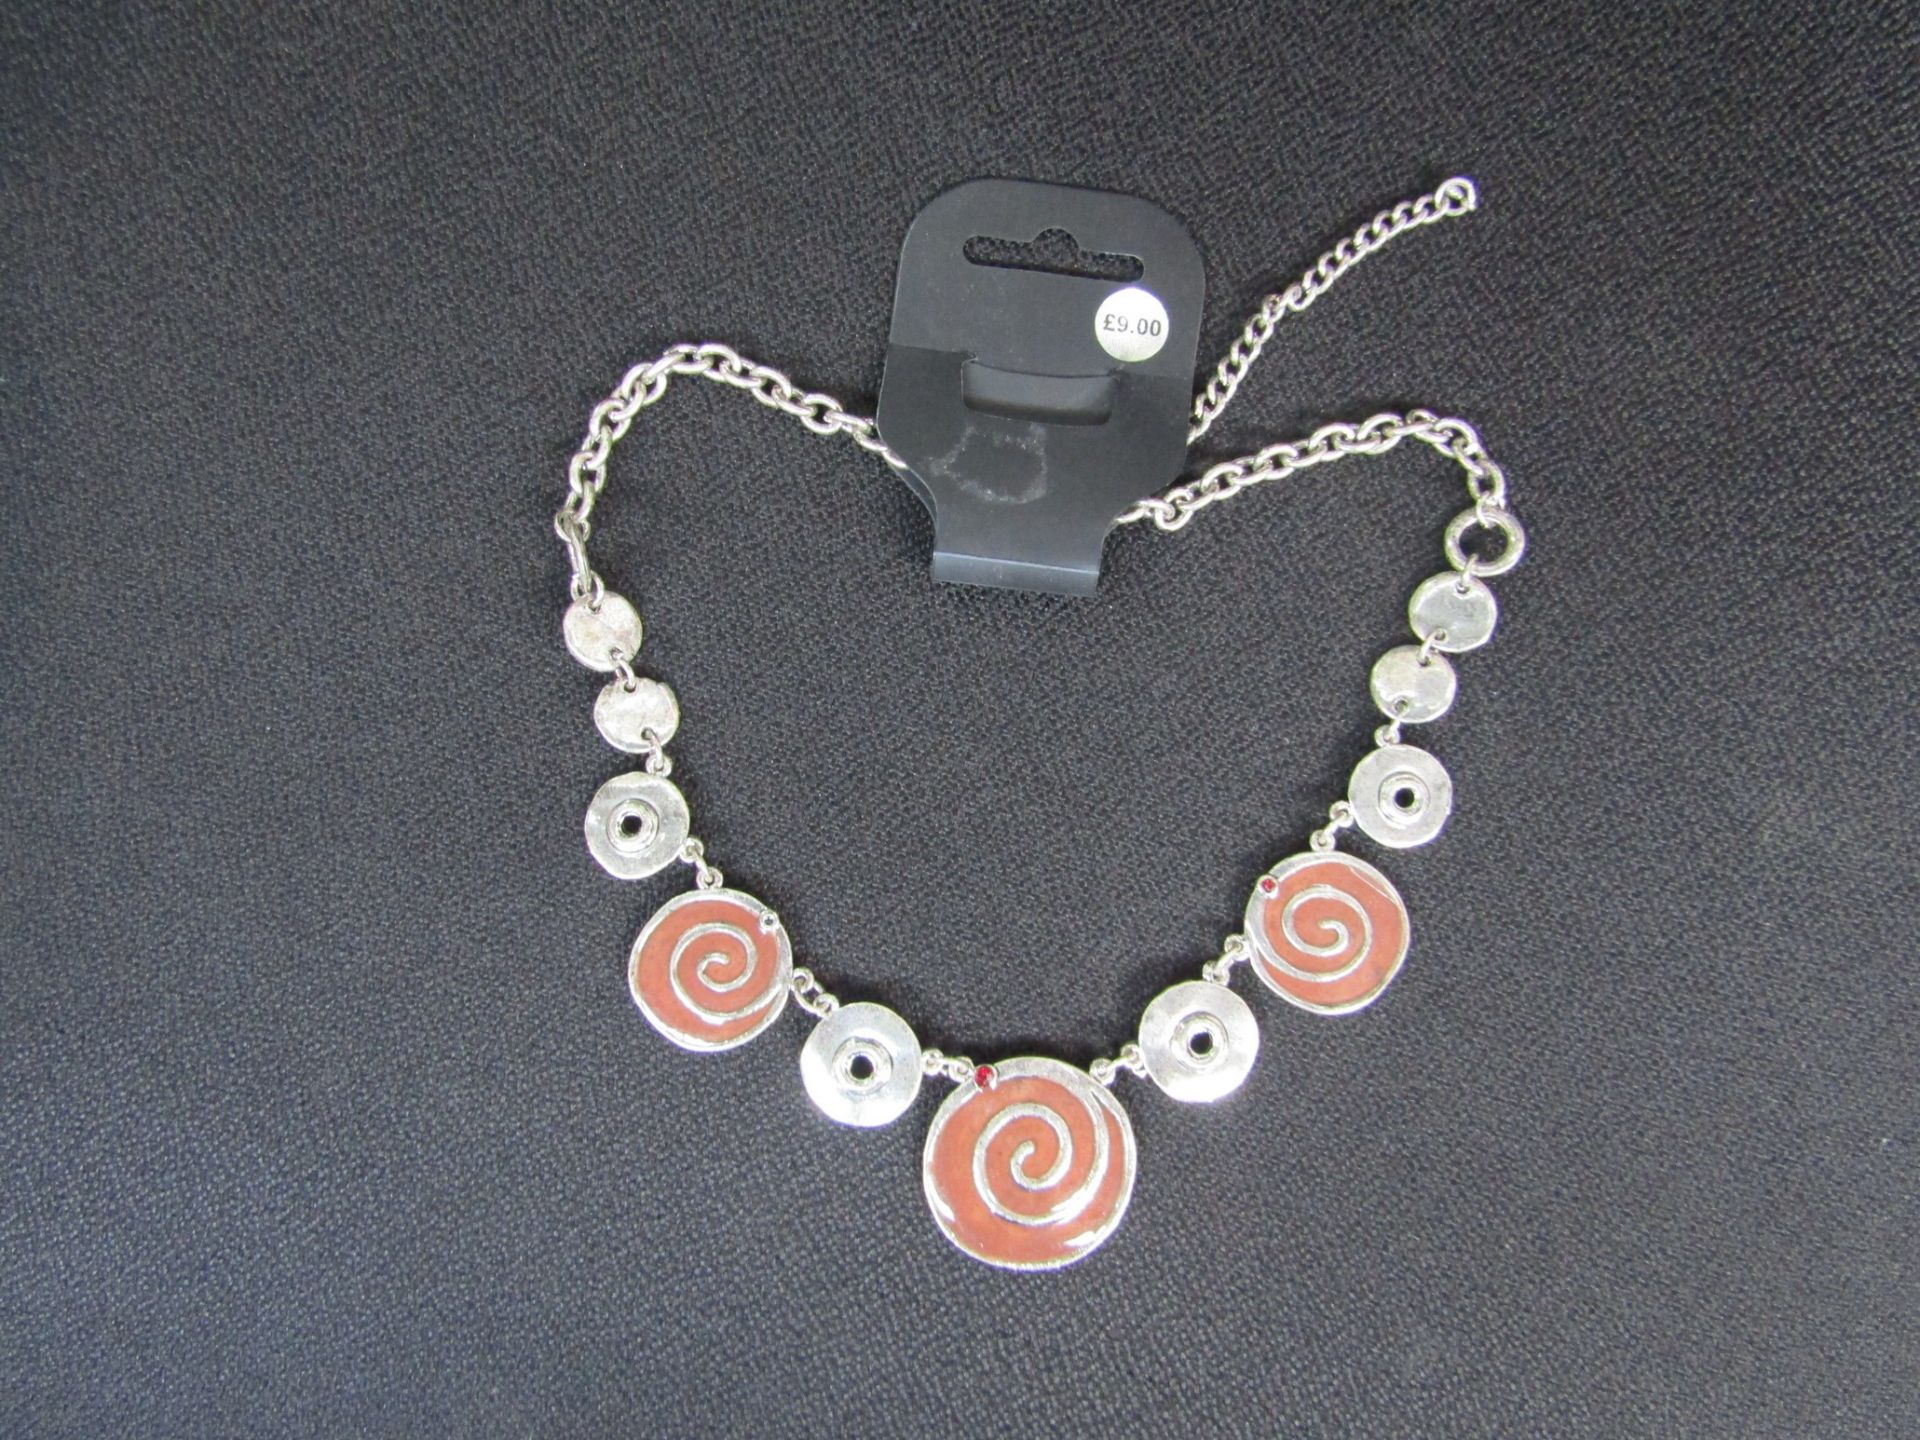 1 BRAND NEW METAL CIRCLE NECKLACE WITH SPIRAL PATT